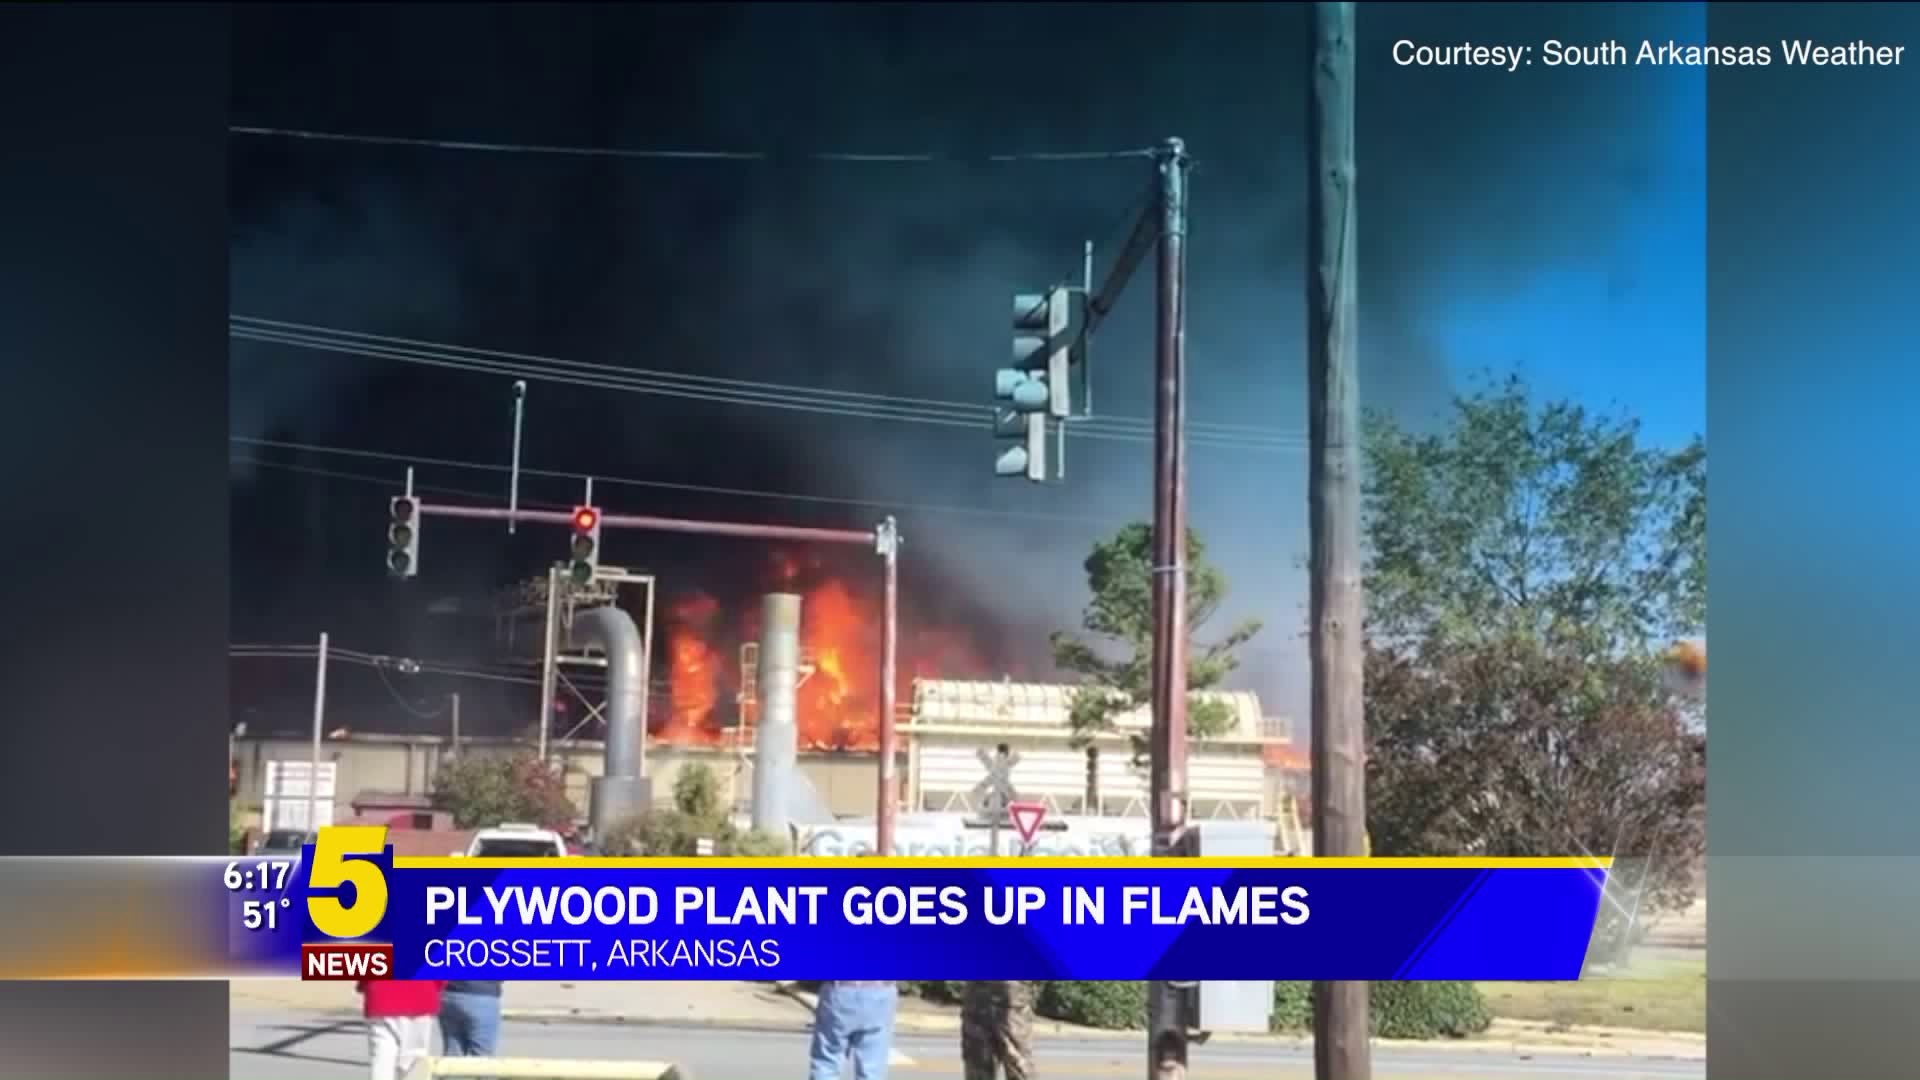 Plywood Plant Goes Up In Flames